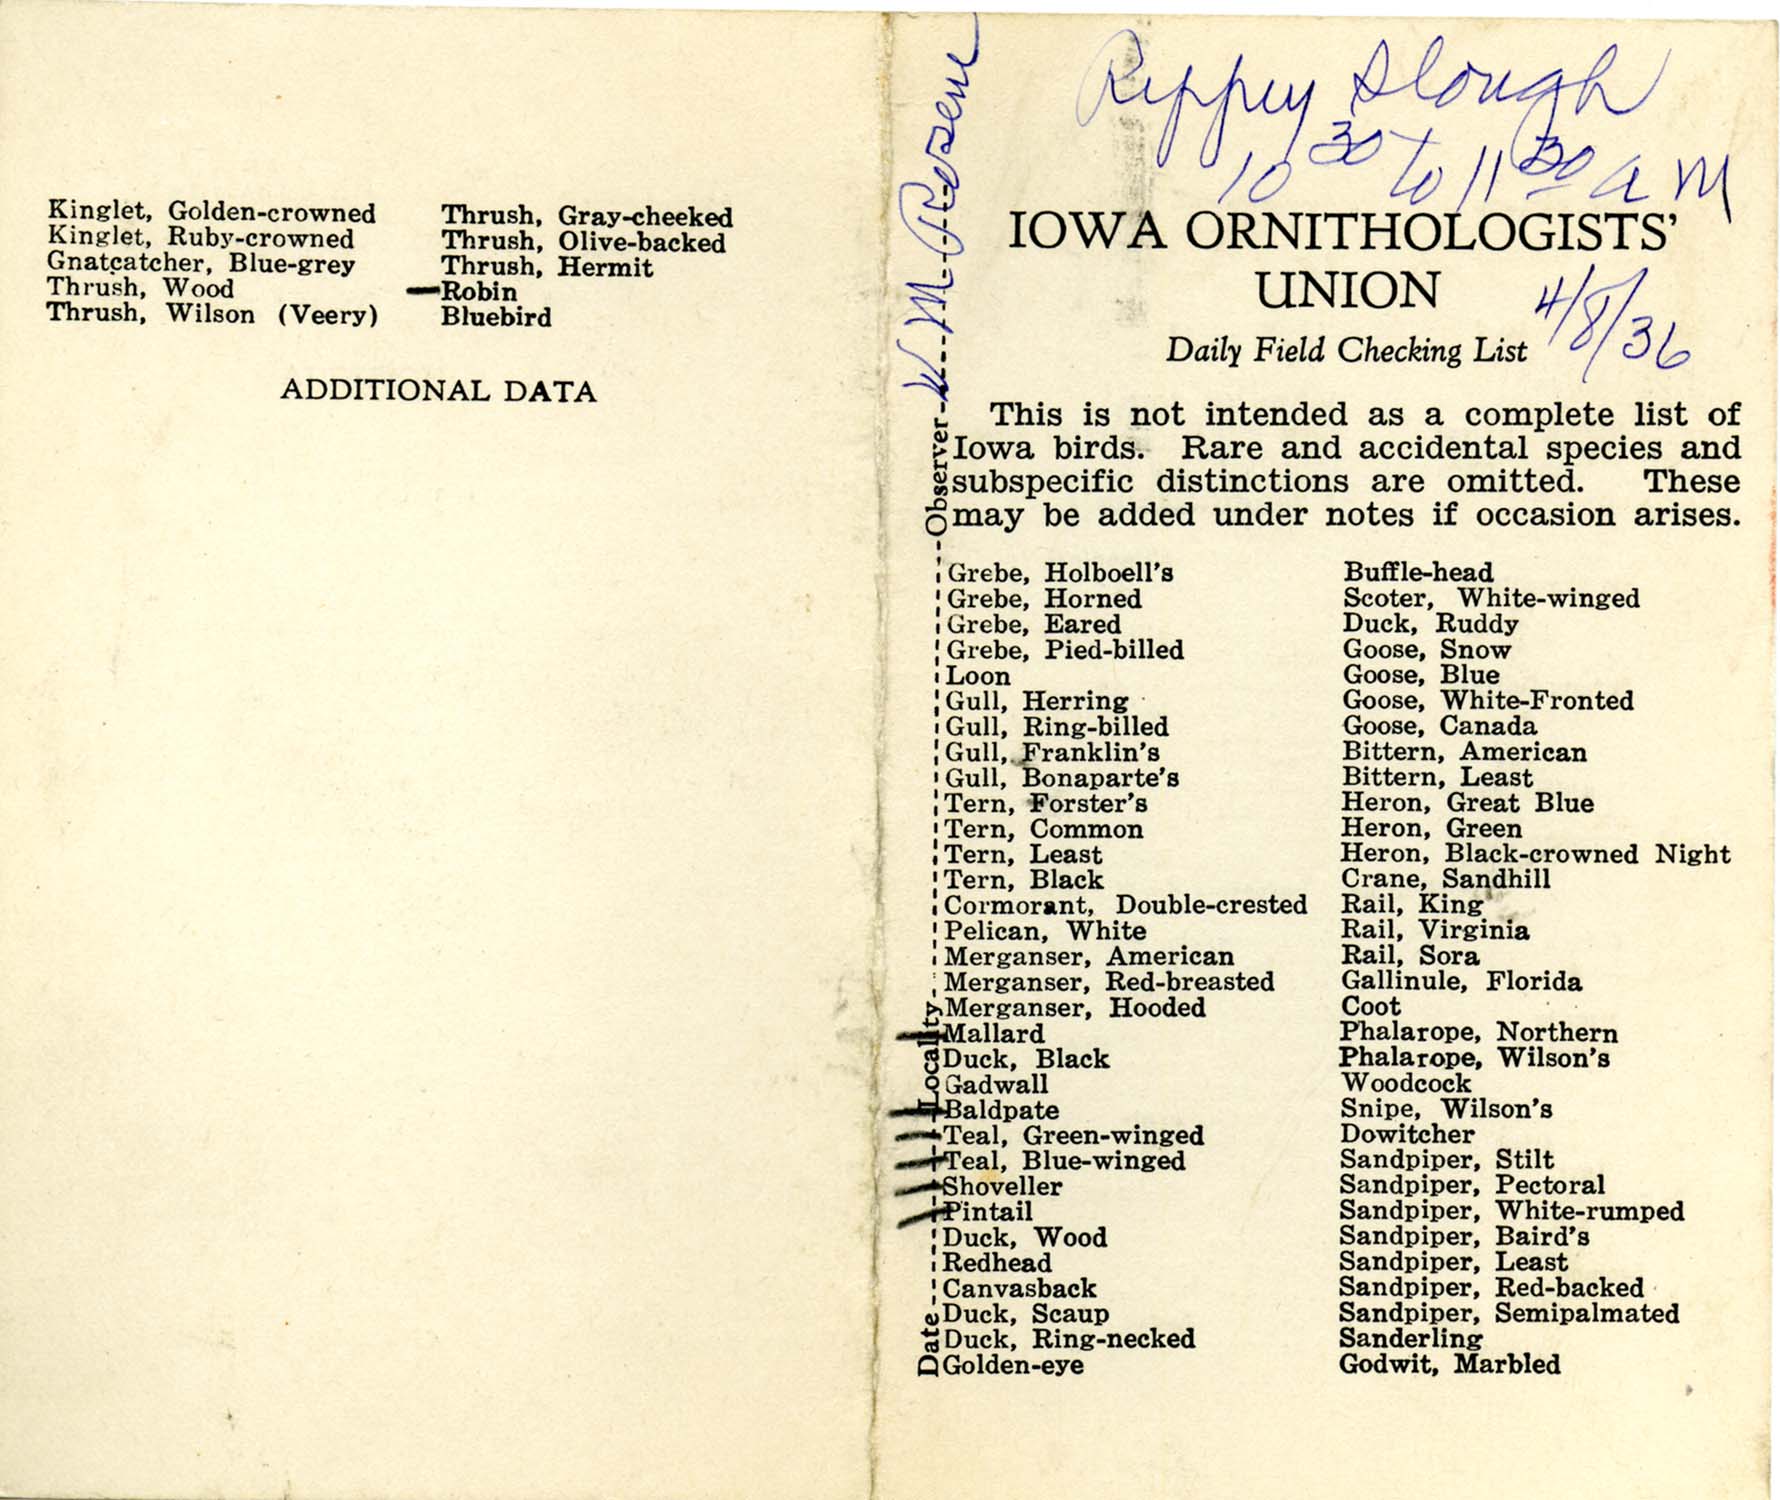 Daily field checking list by Walter Rosene, April 8, 1936